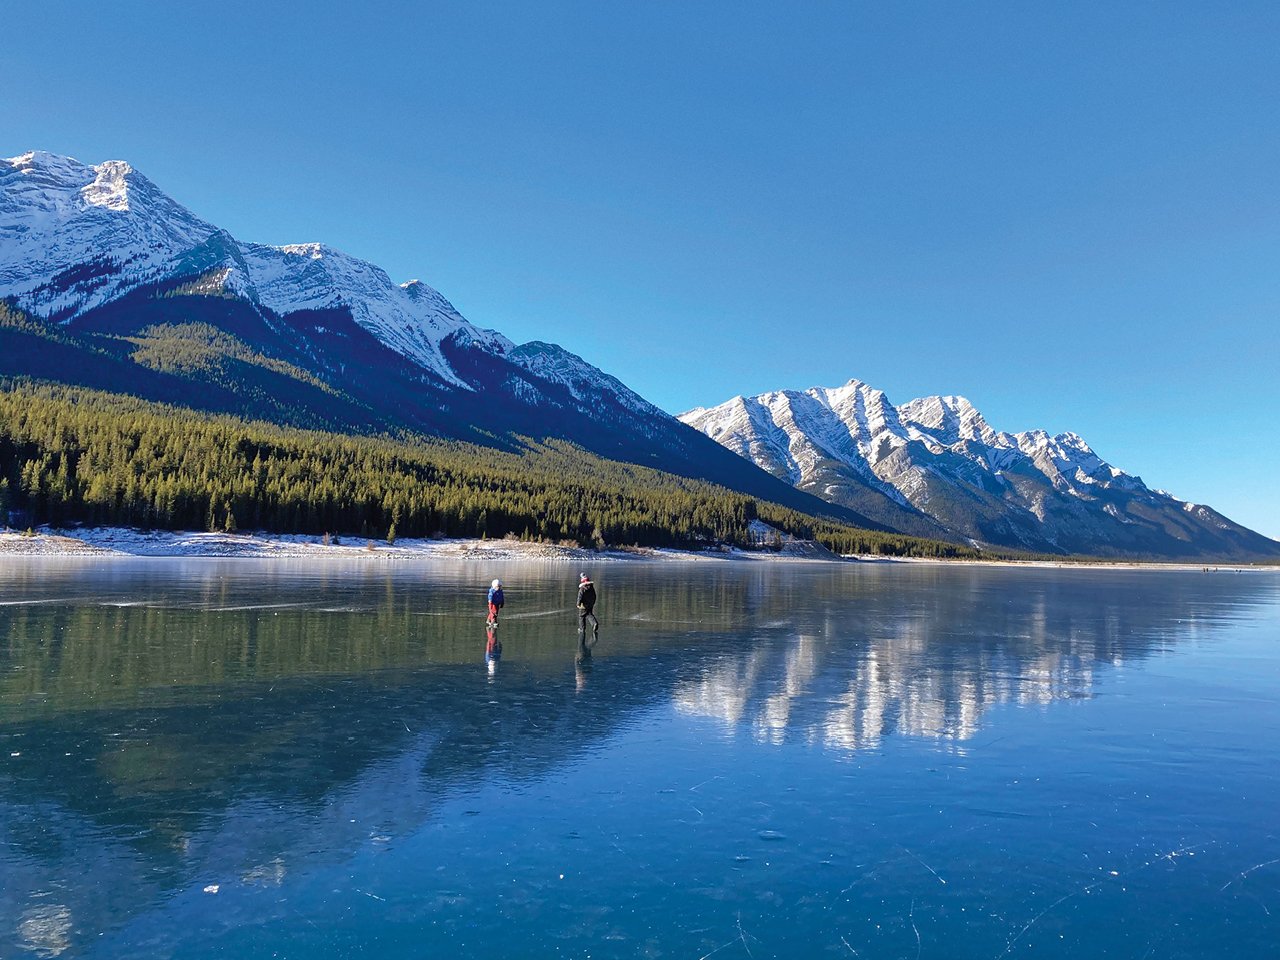 Two people skate on a lake with the Rockies and blue sky in the background